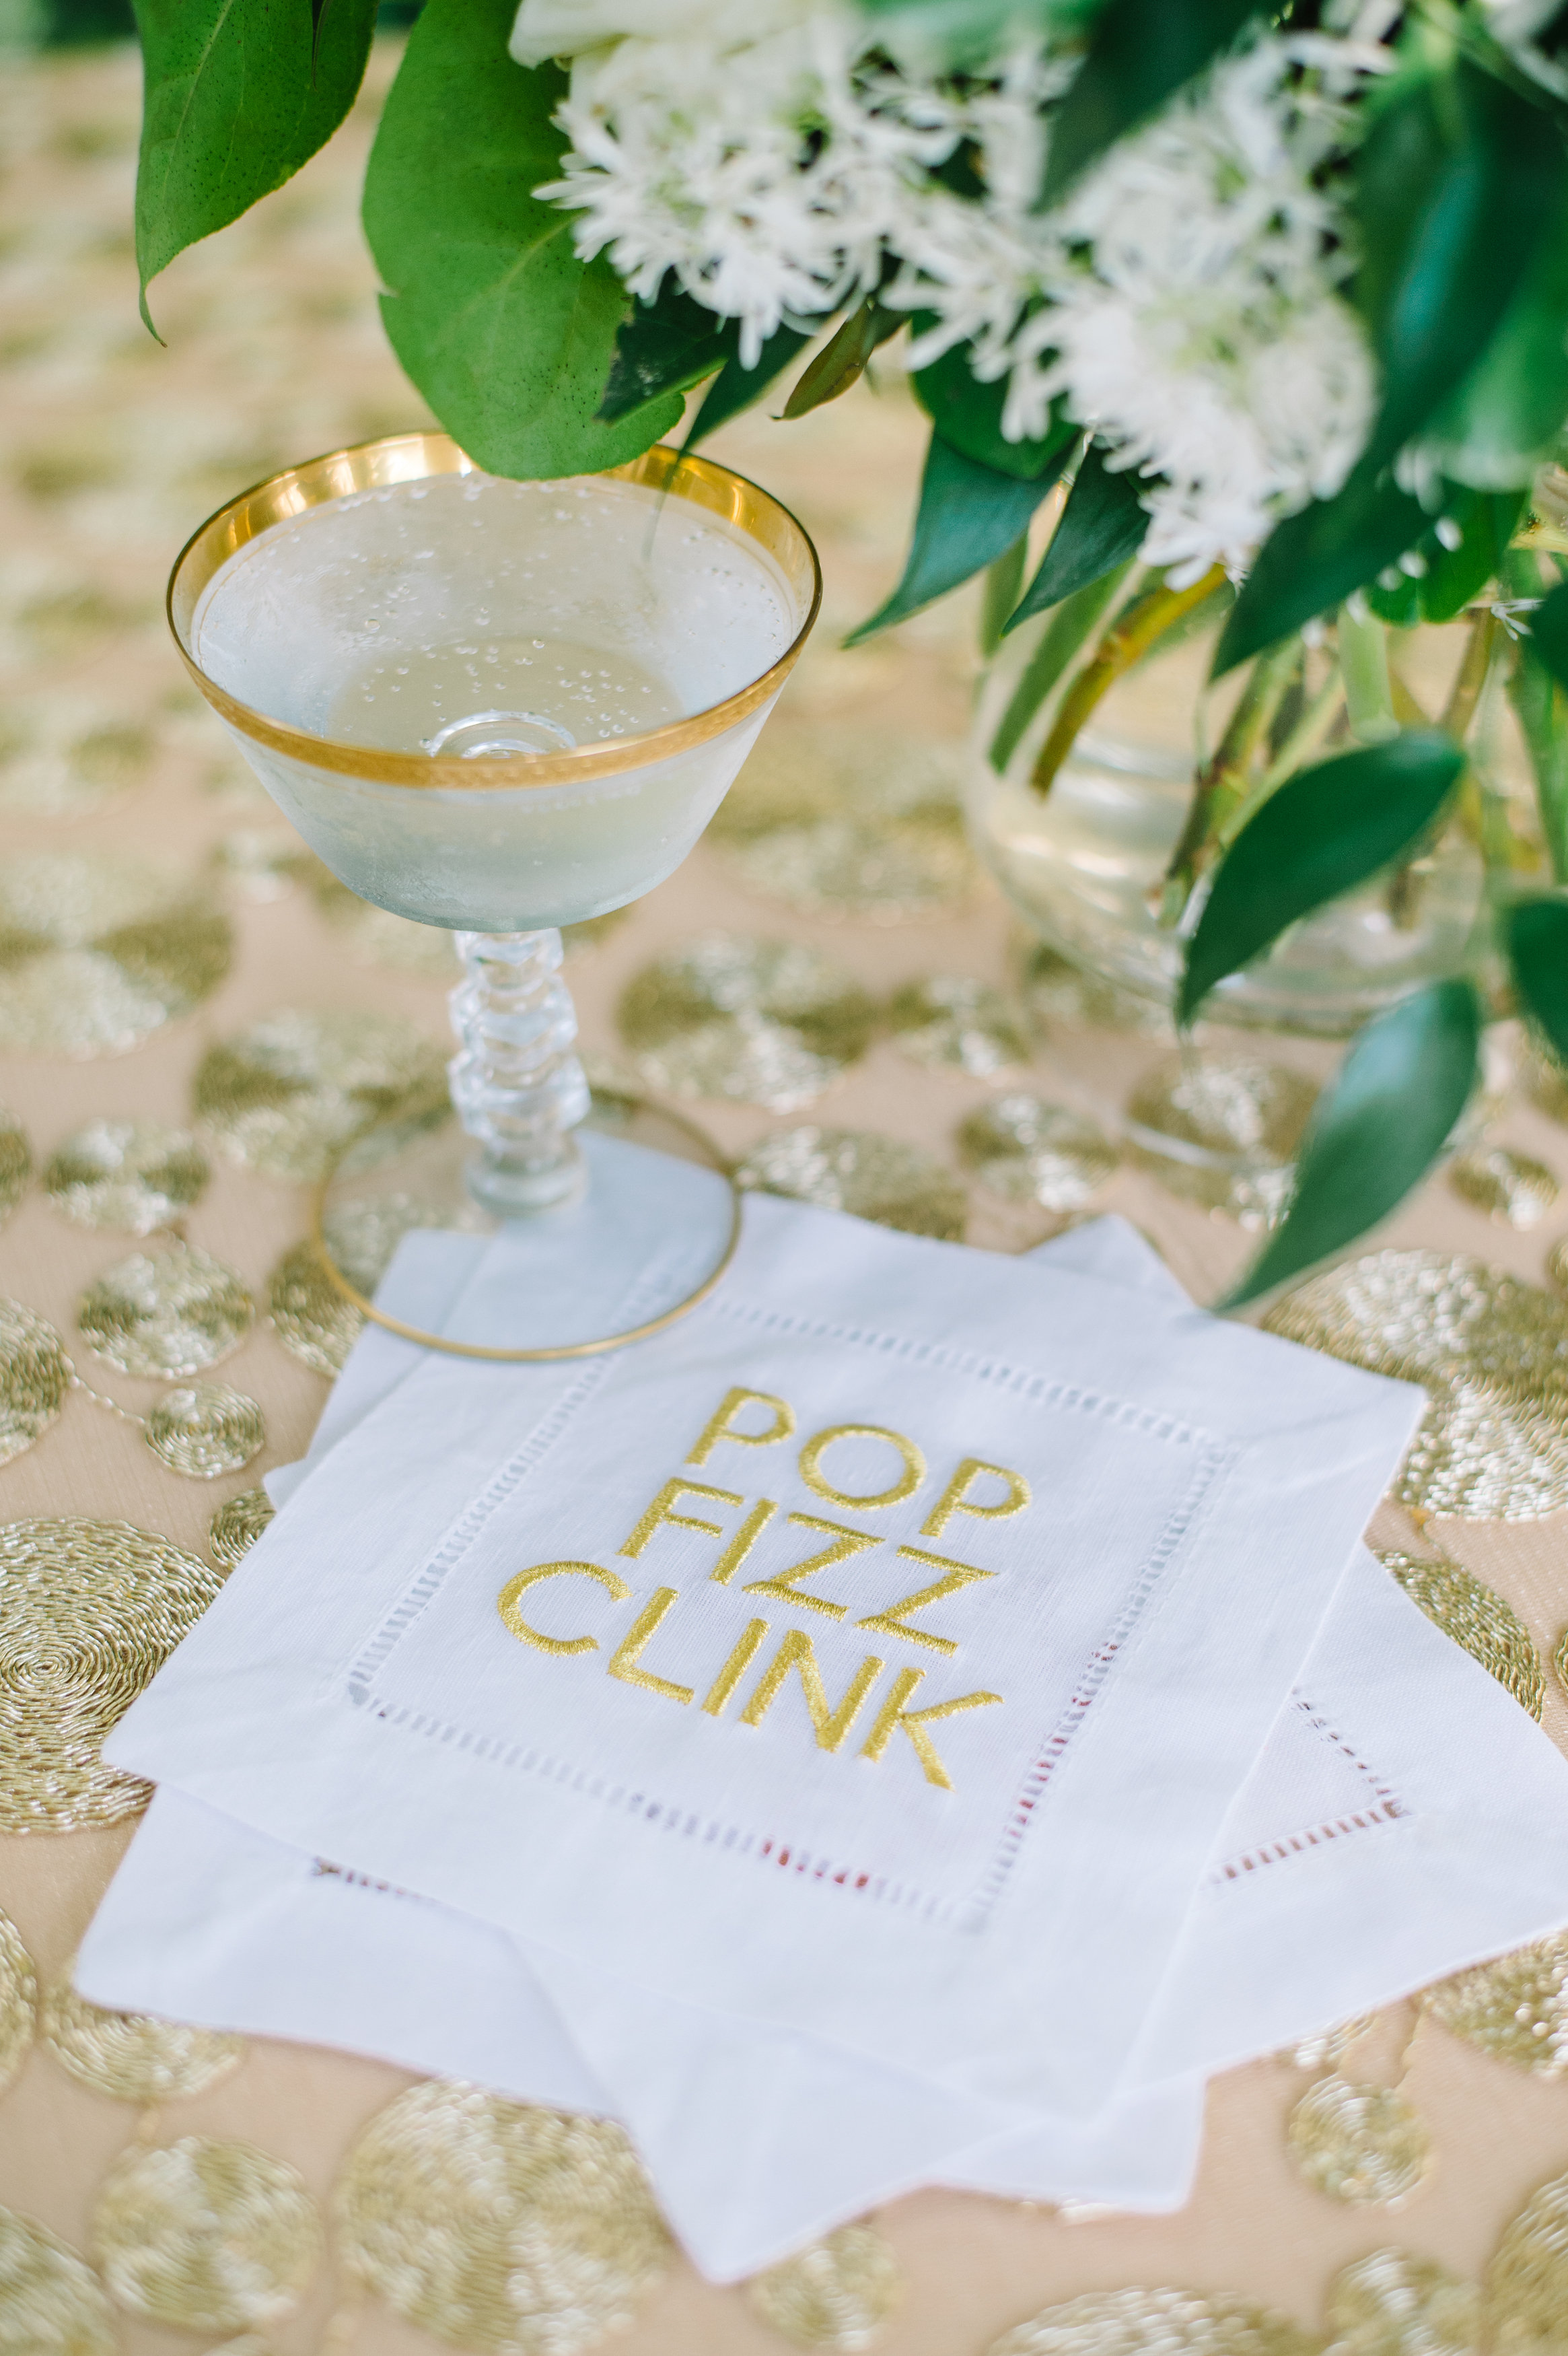 made-on-marlow-pop-fizz-clink-cocktail-napkins-the-knot-market-mixer-cannon-green-charleston-wedding